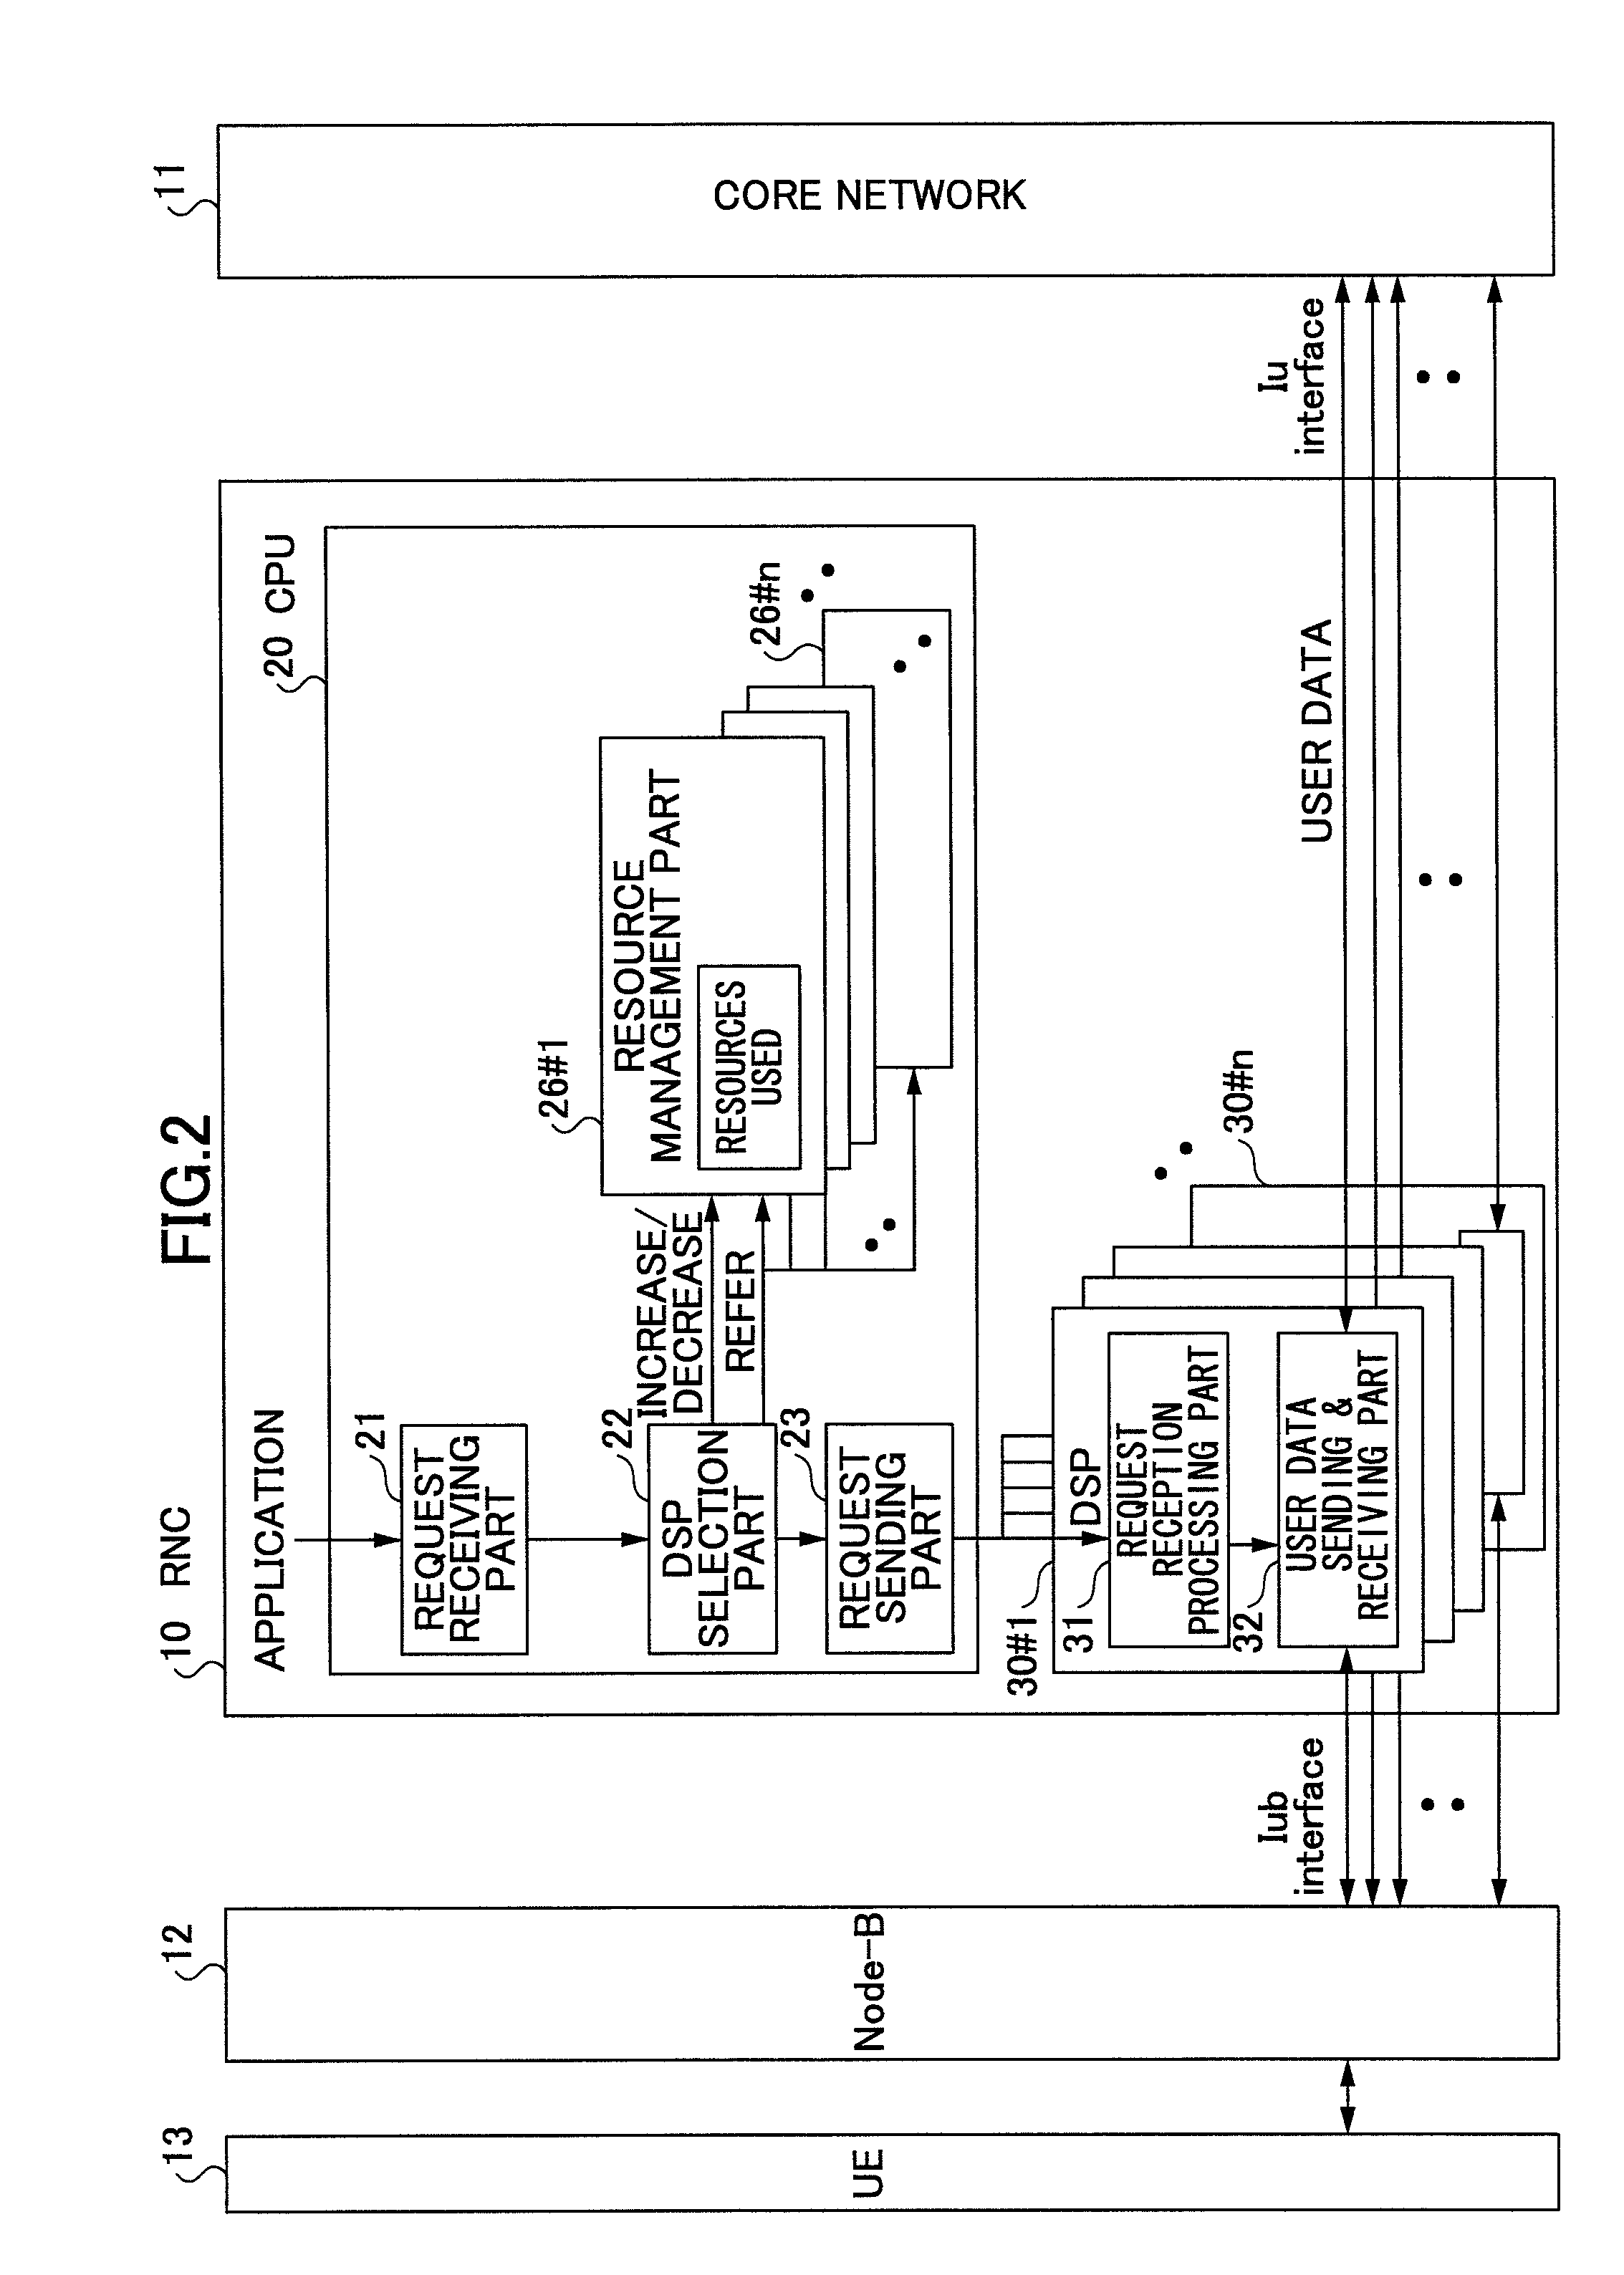 Resource management apparatus and radio network controller